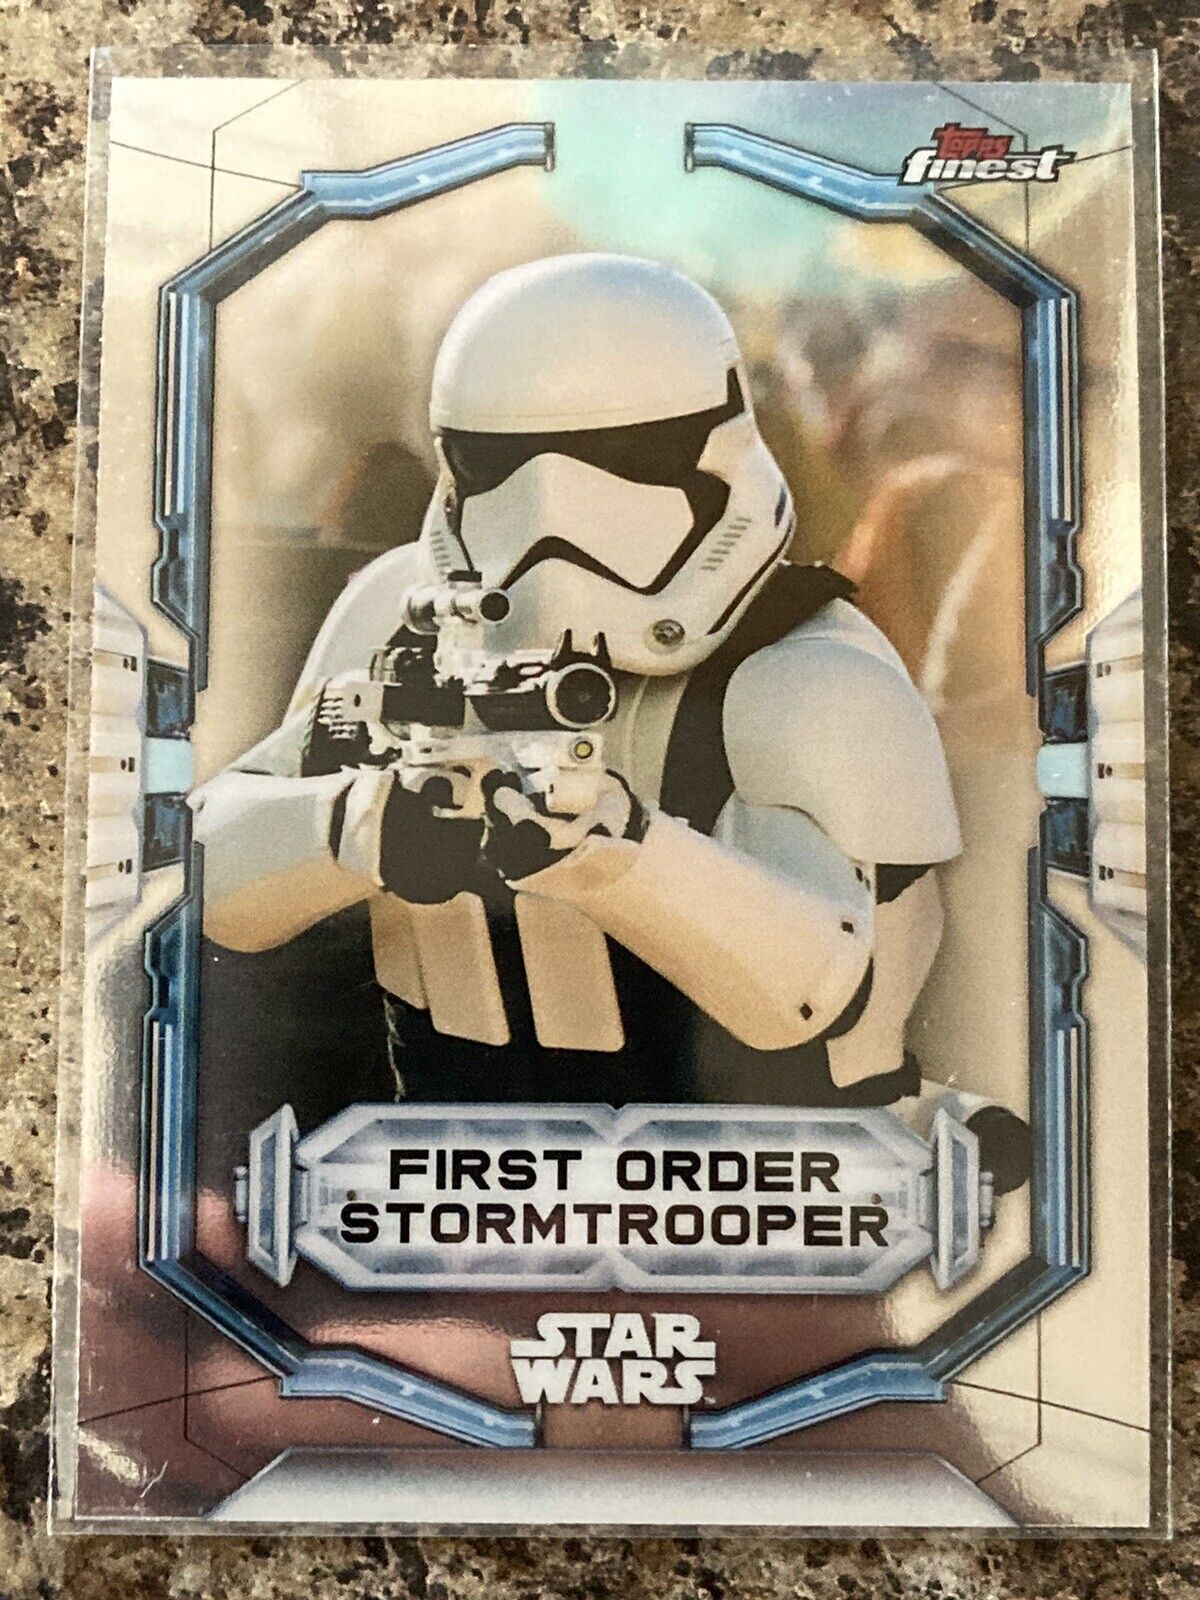 2022 Topps Finest Star Wars Base First Order Stormtroopers #37